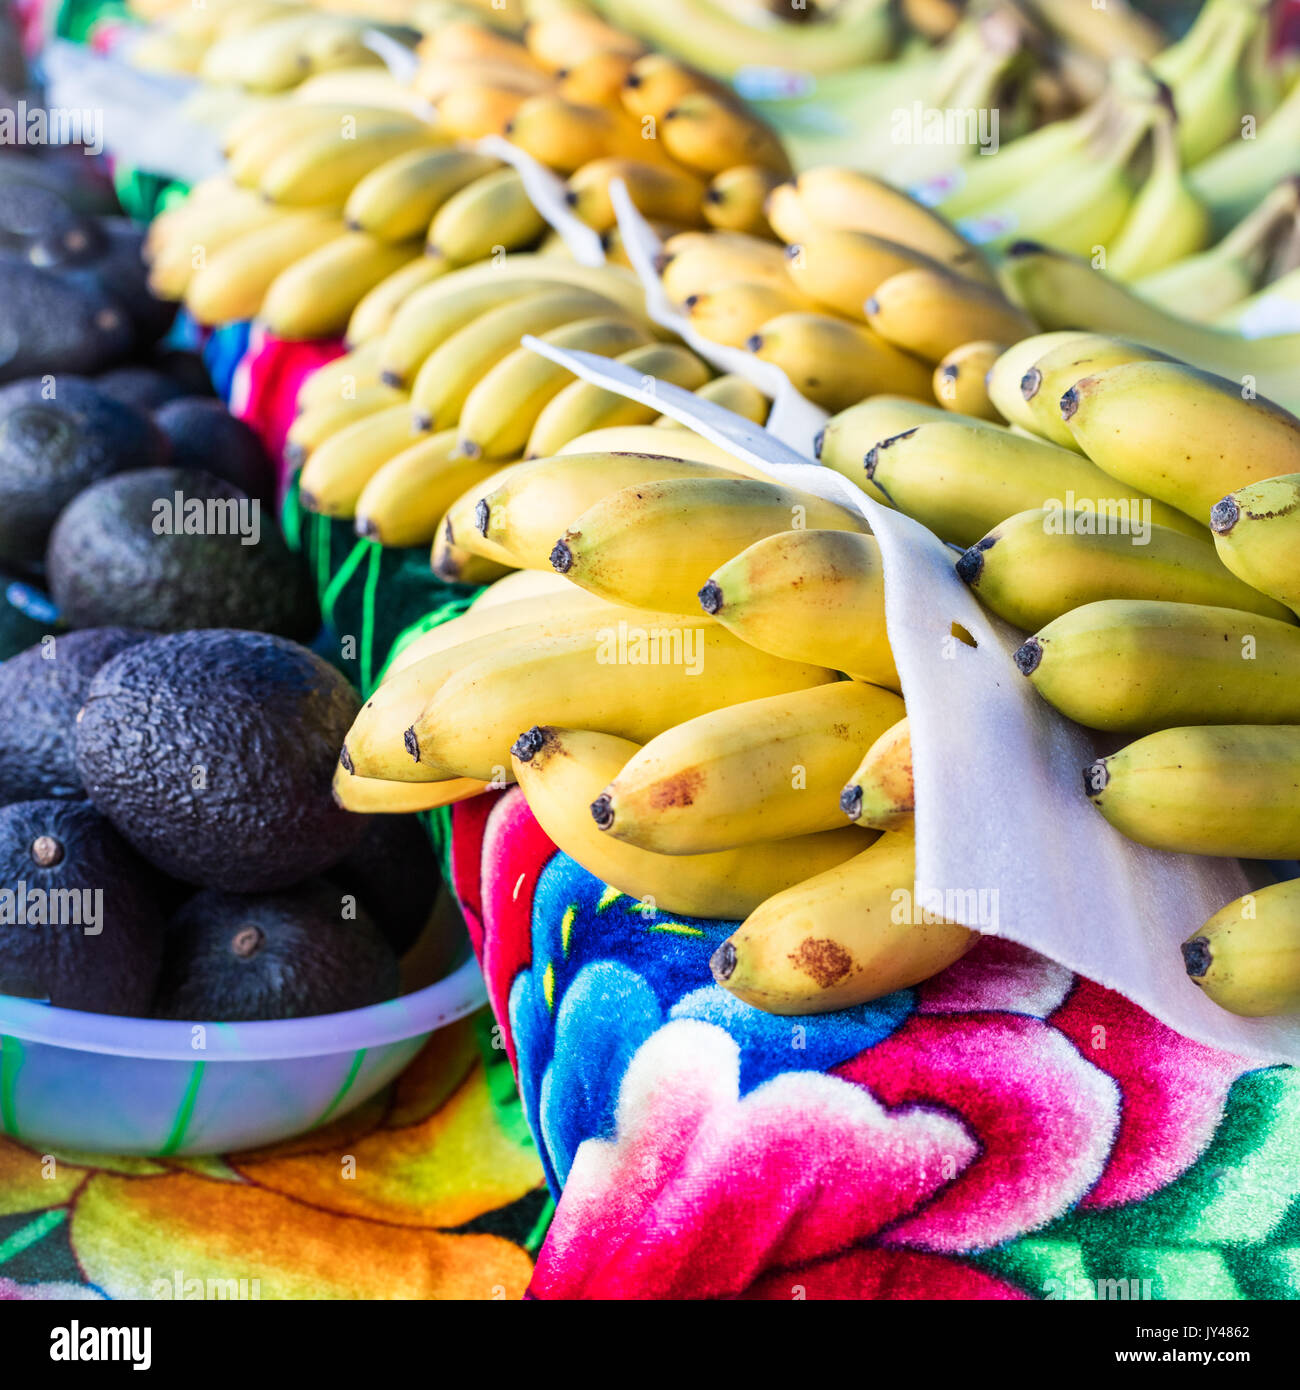 A square photo of rows of bananas and avacados at a farmers market. Stock Photo